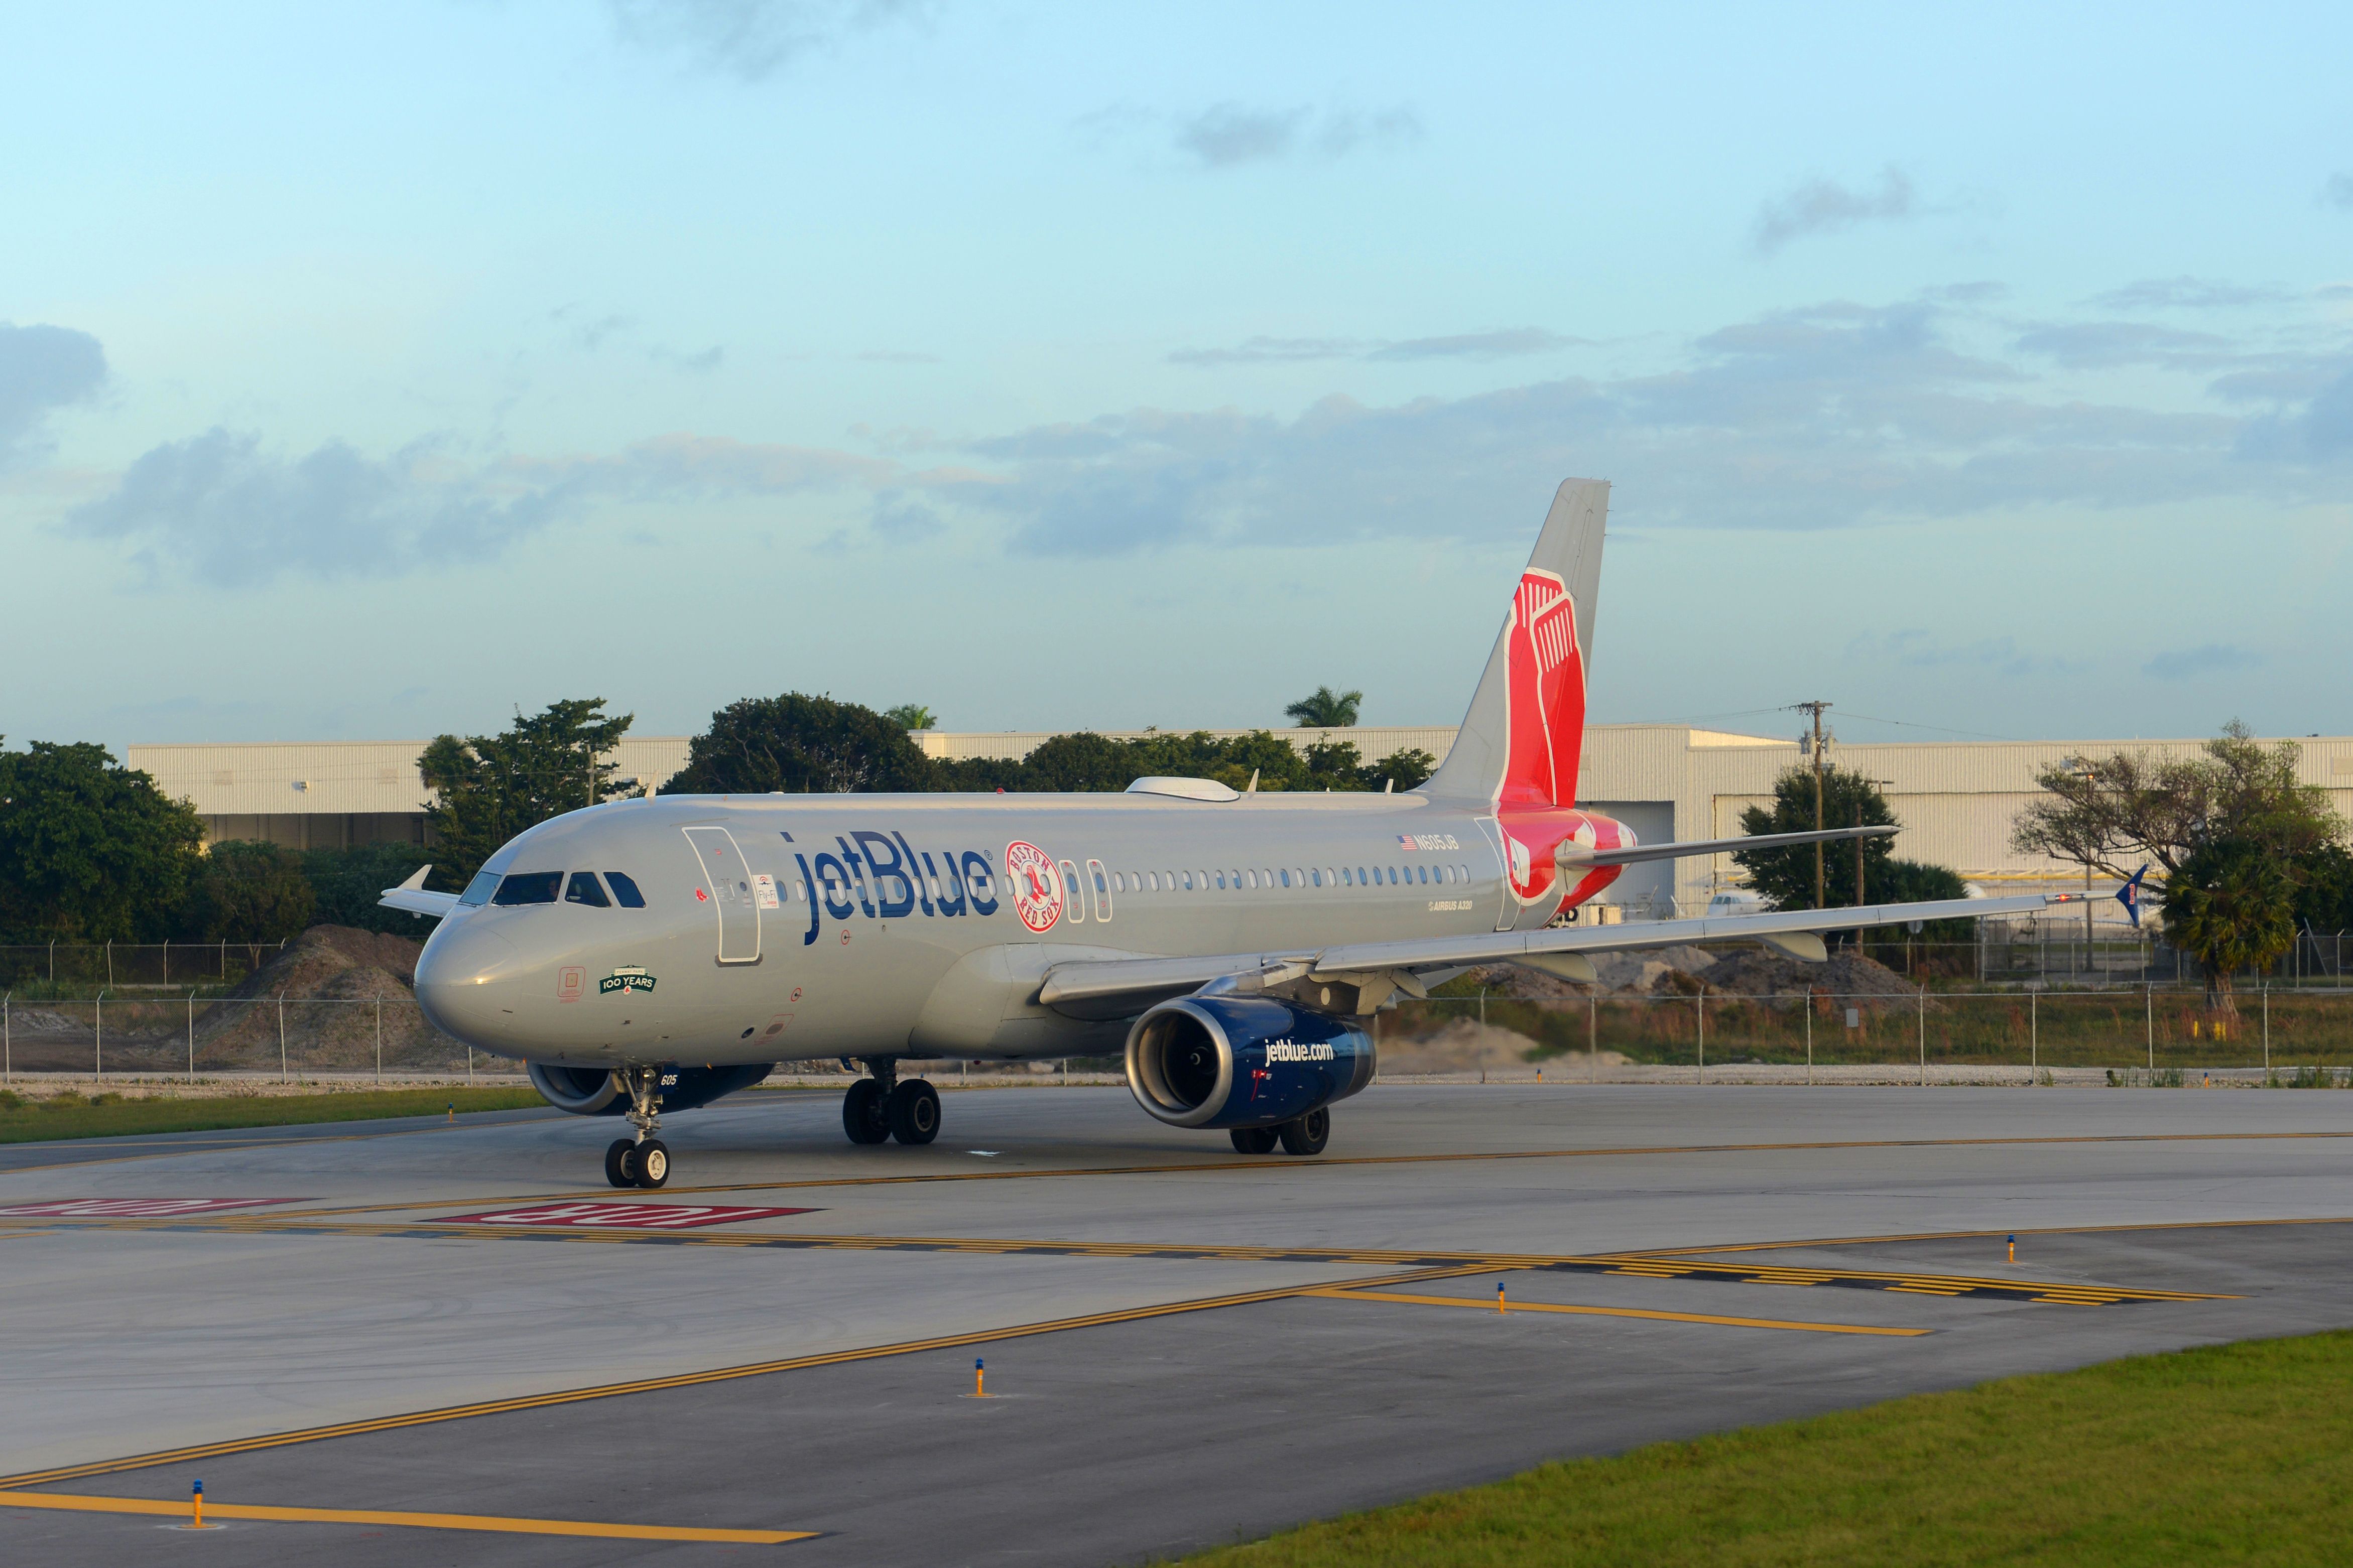 A JetBlue Airbus A320 in Red Sox Livery on an airport apron.